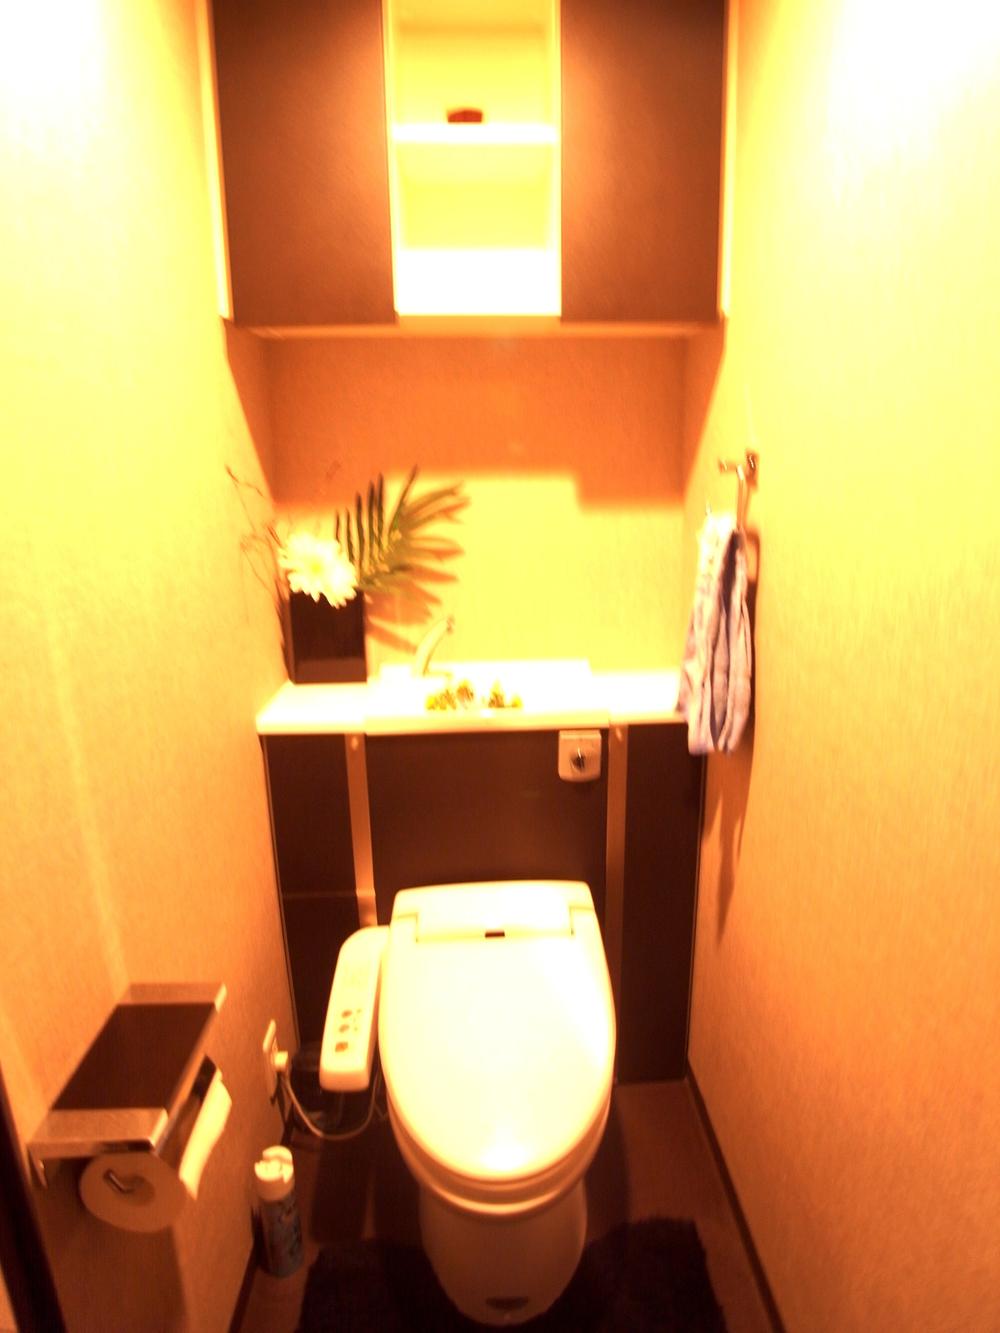 Toilet. Toilet (October 2013) Shooting  ※ Furniture and furnishings are not included in the sale price.